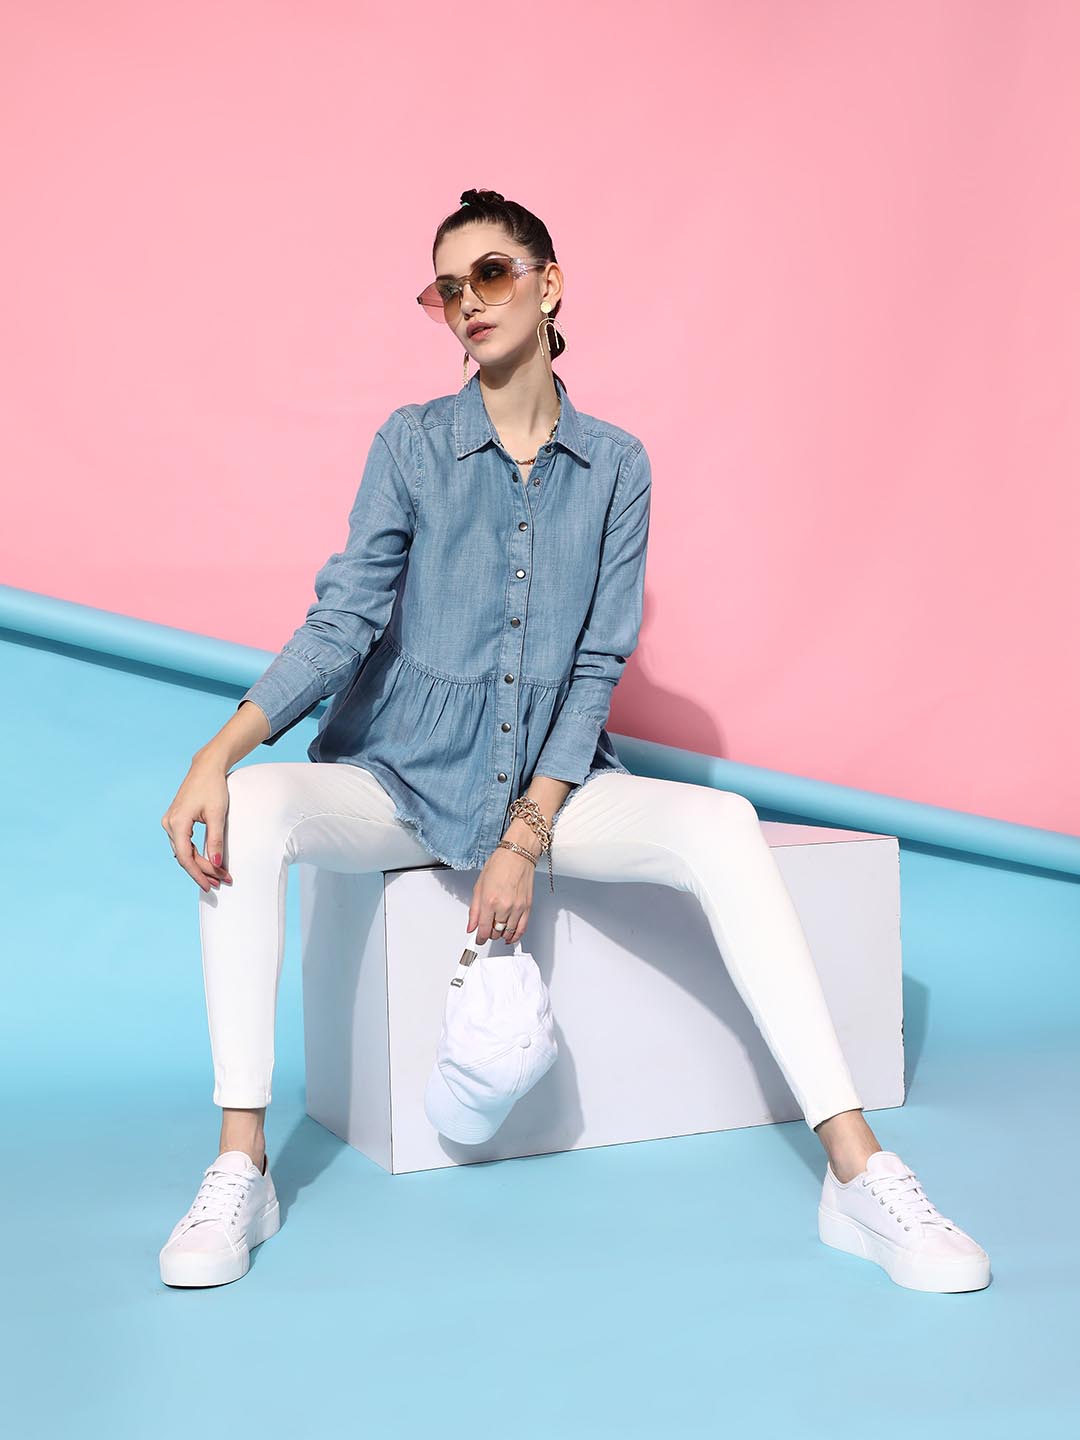 Carla Nunez - Basics👖🥼👡 White top, blue jeans and nude high heels! (You  guys could wear tennis or flats tho🥿👟) | Facebook